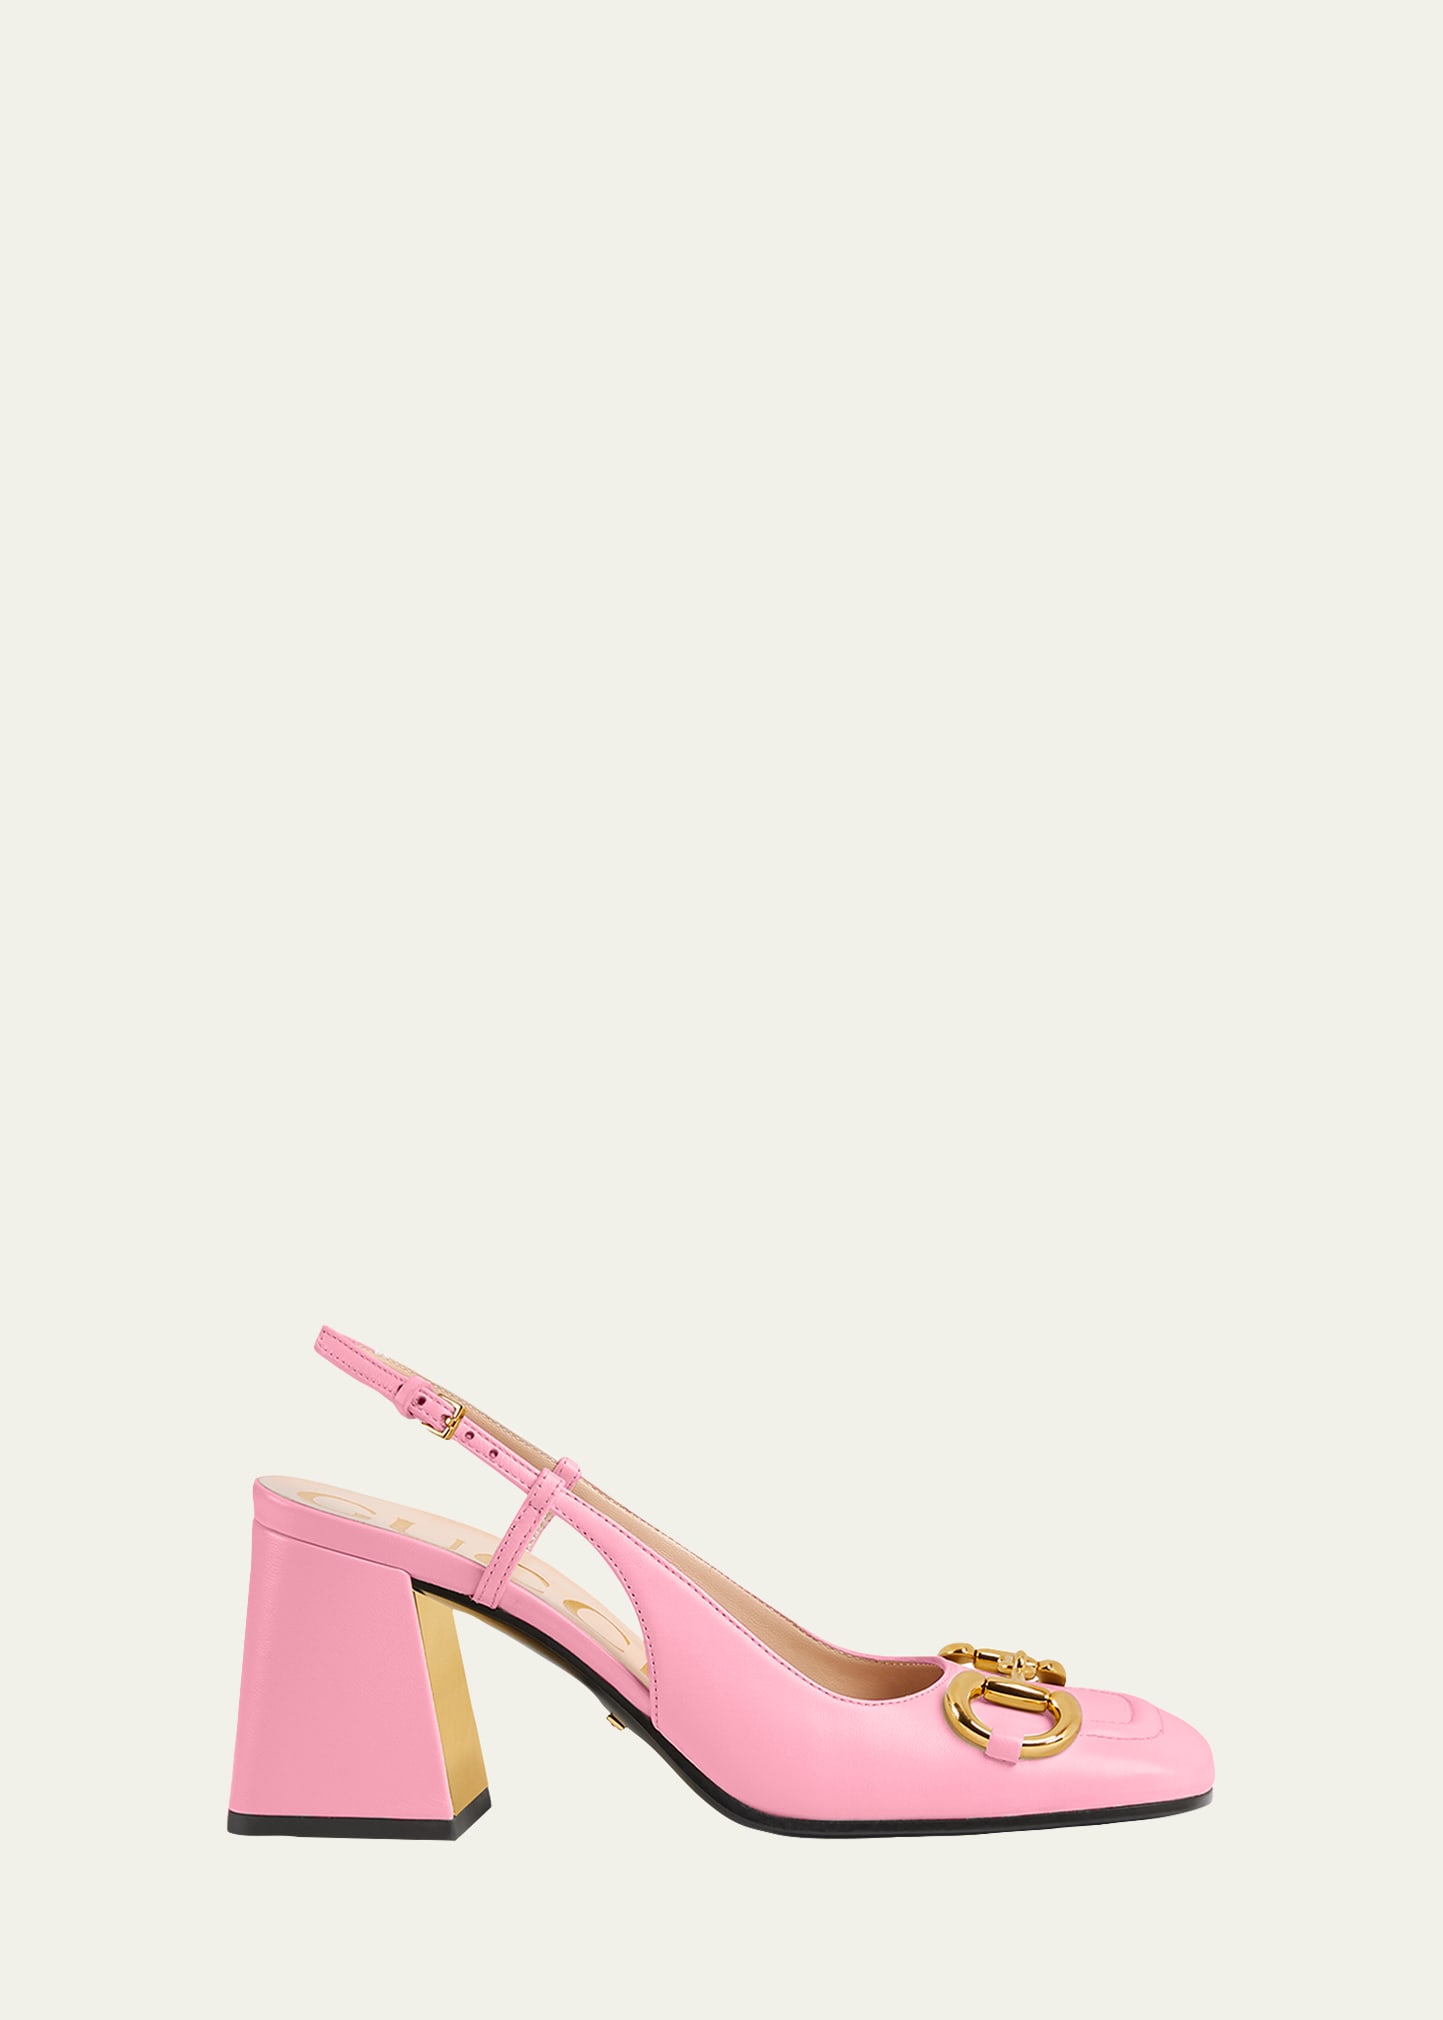 Gucci Baby 75mm Horse Bit Slingback Pumps In Mystic White